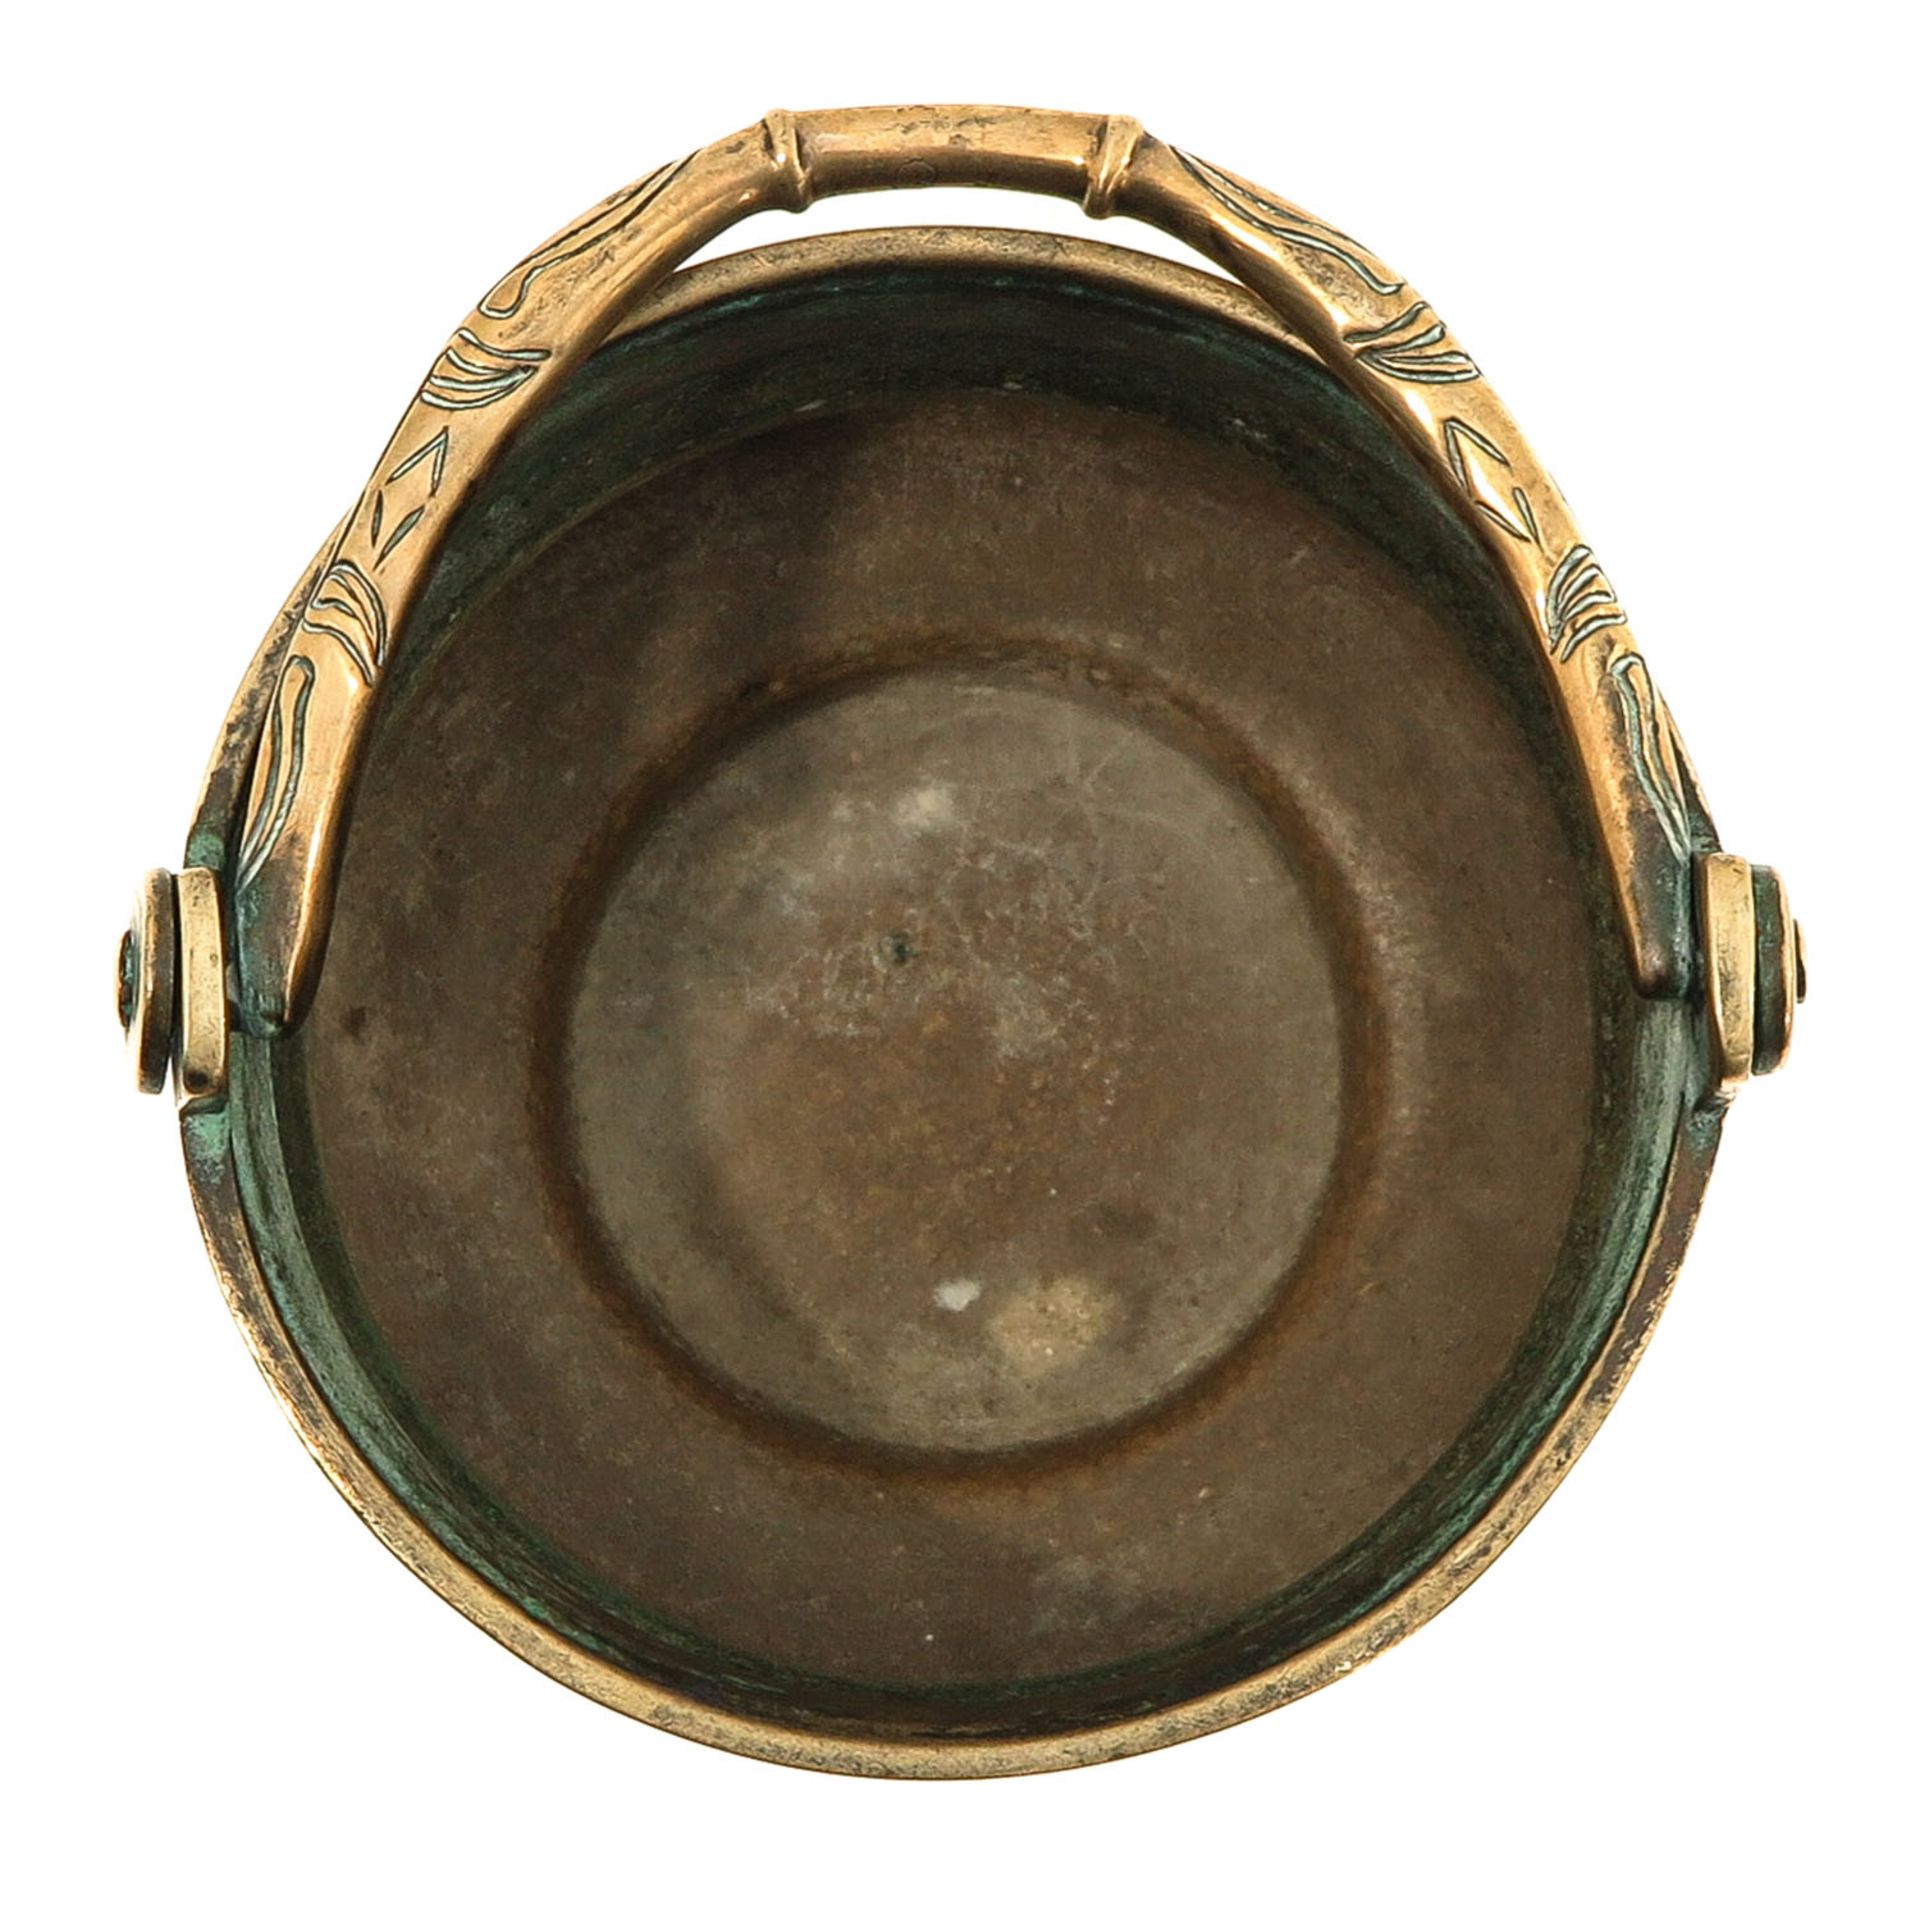 A 17th Bronze Bucket - Image 5 of 7